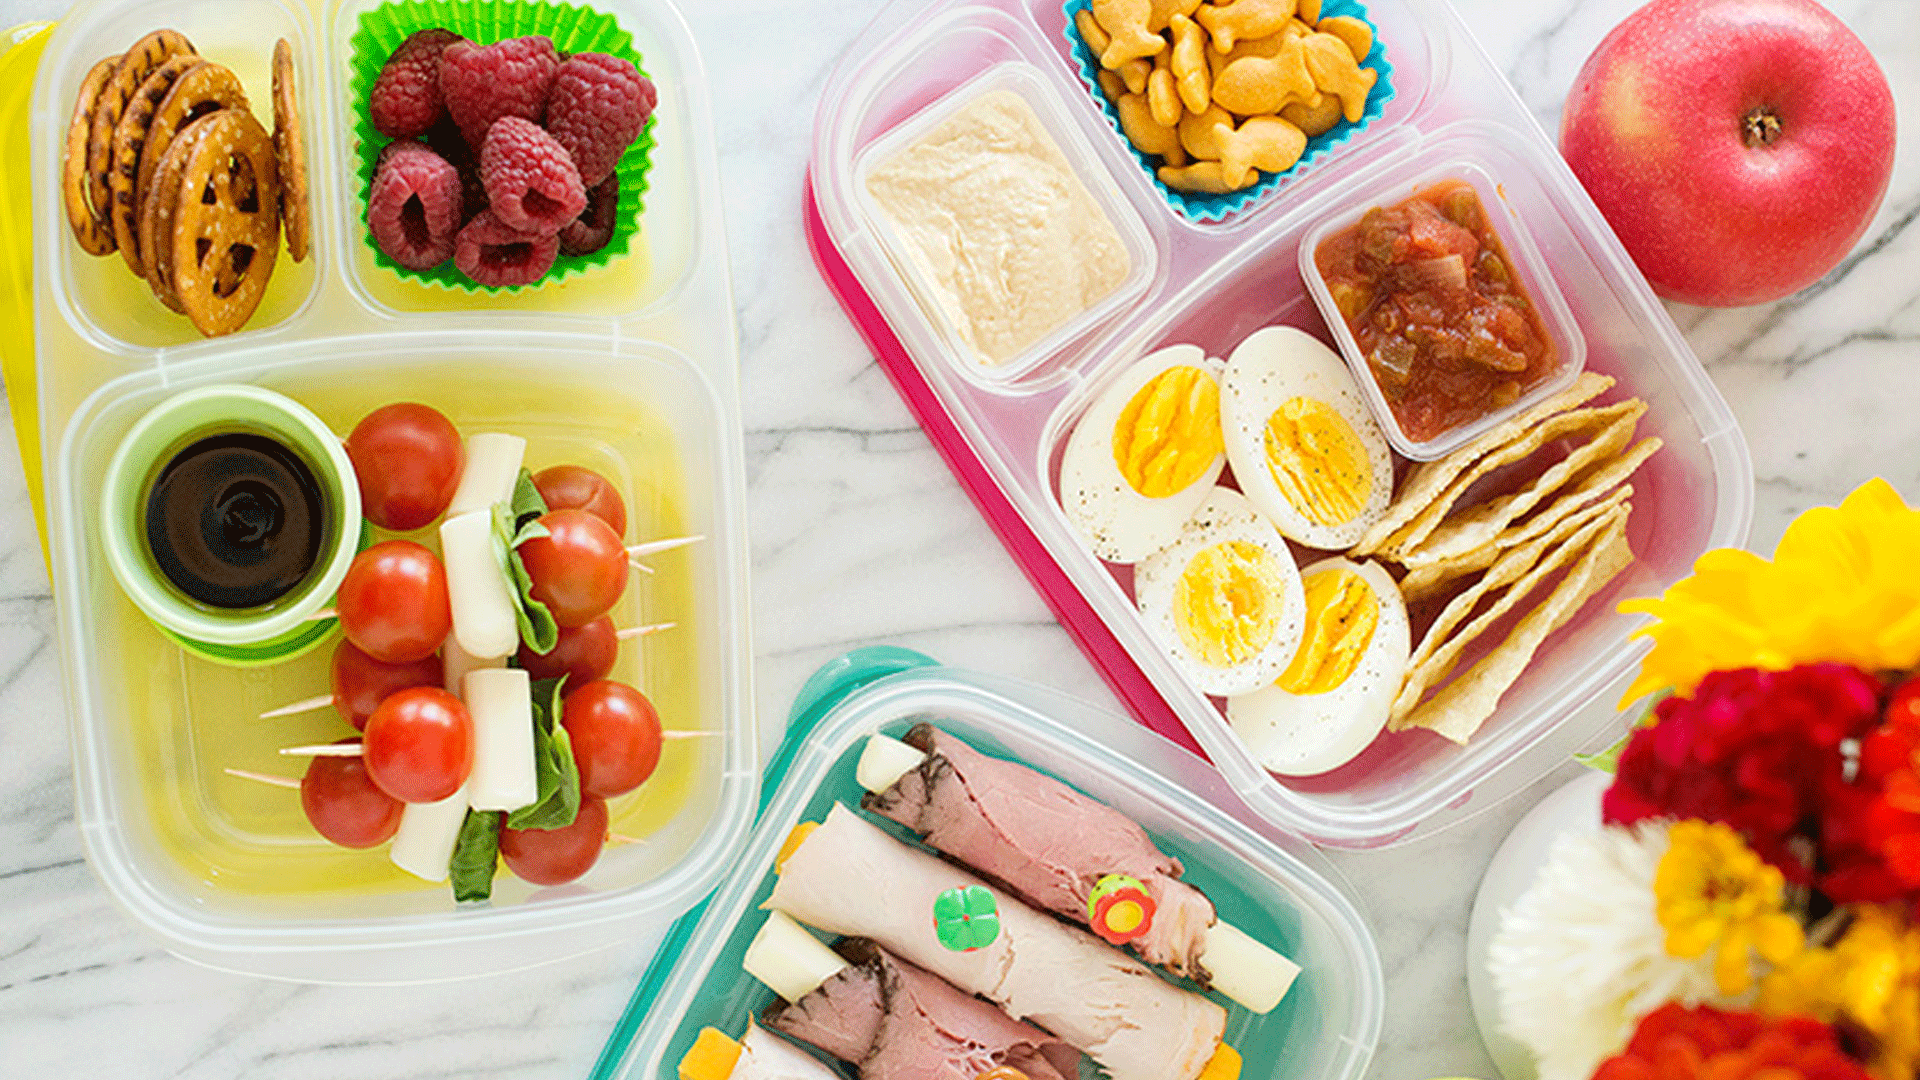 21 Kids Tell Us What They Want In Their Lunchbox